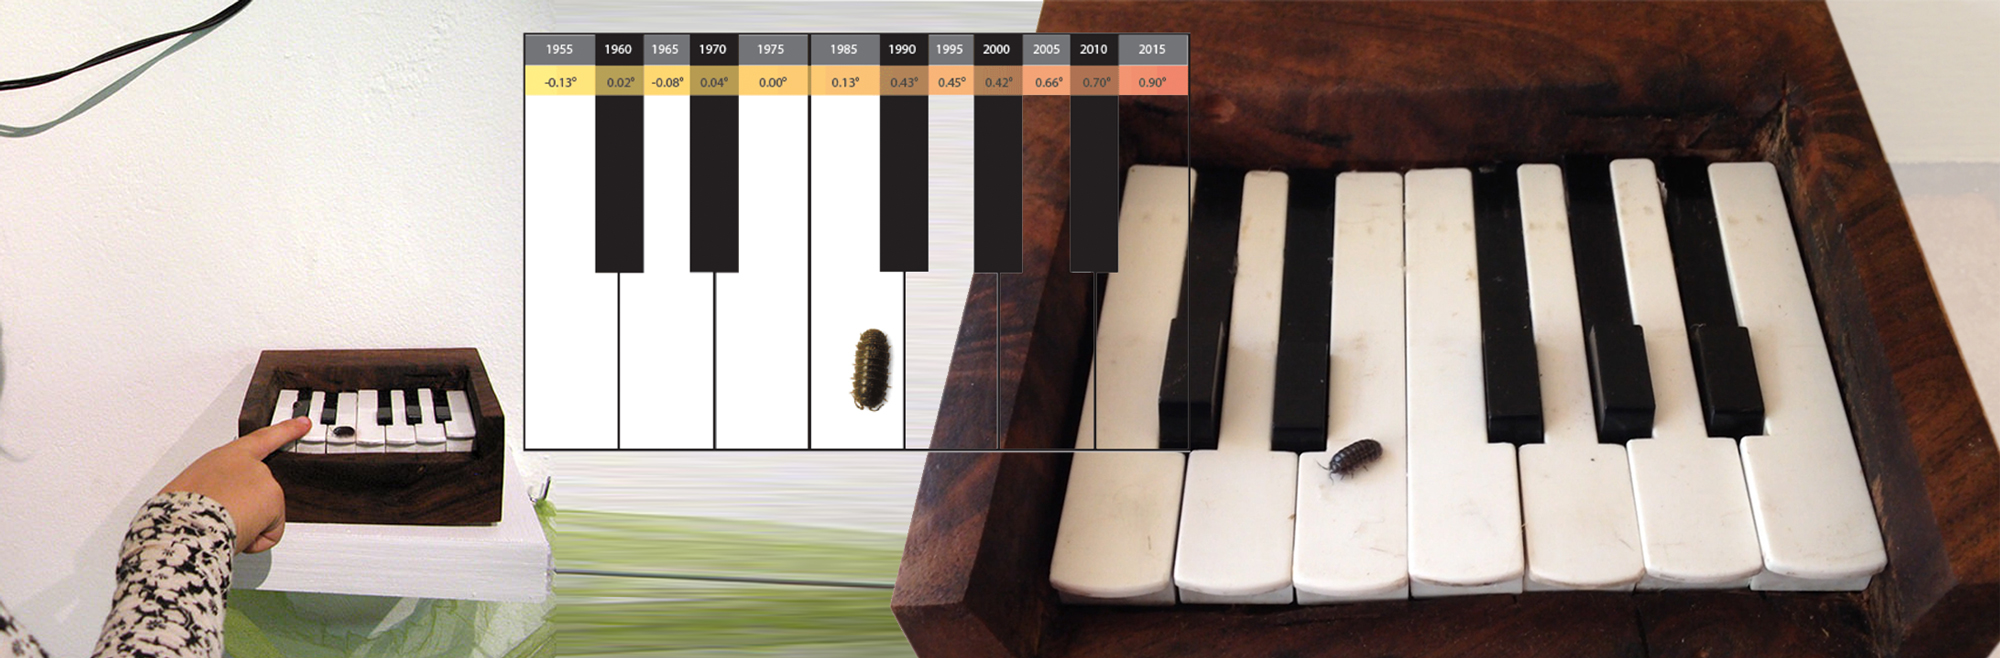 Pianissimo is a piano tuned to reflect changes to Earth’s global mean surface temperature. The resulting melody reveals something off with Earth’s temperature, as the notes reflect the planet’s shift over the past decades. More at http://imaginaryscience.org/project/pianissimo/